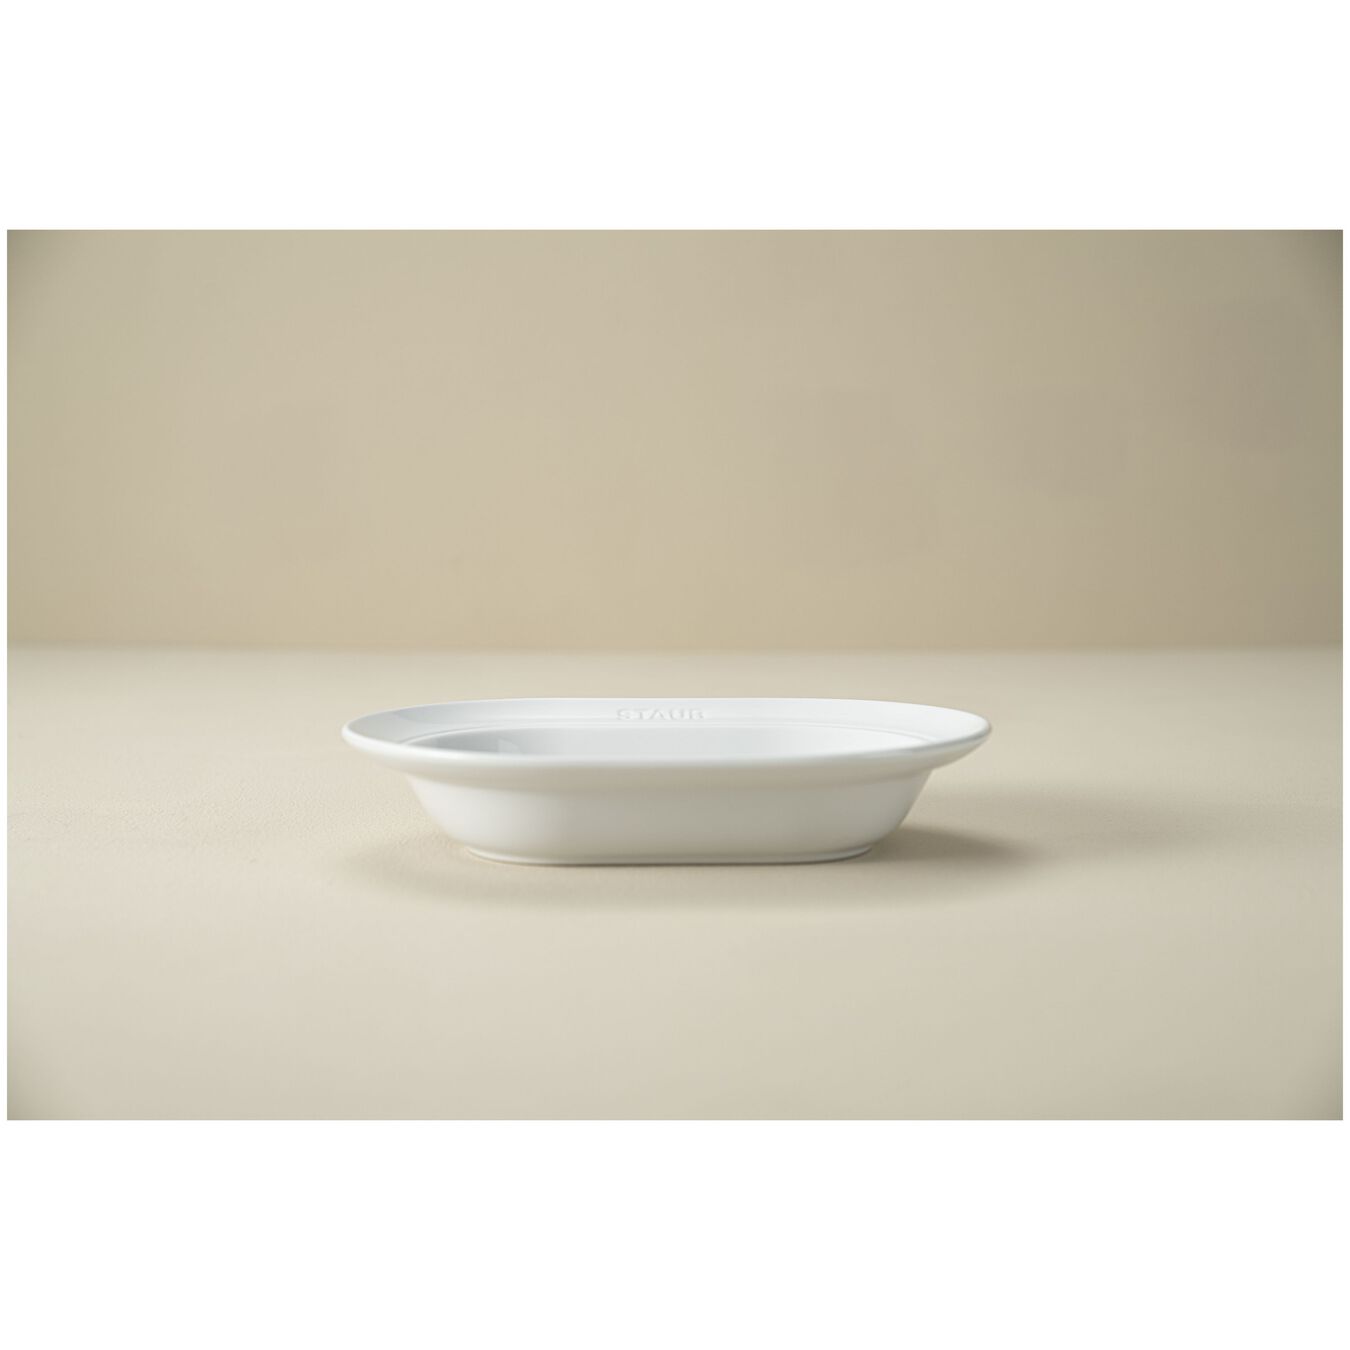 10-inch, oval serving dish, white,,large 2